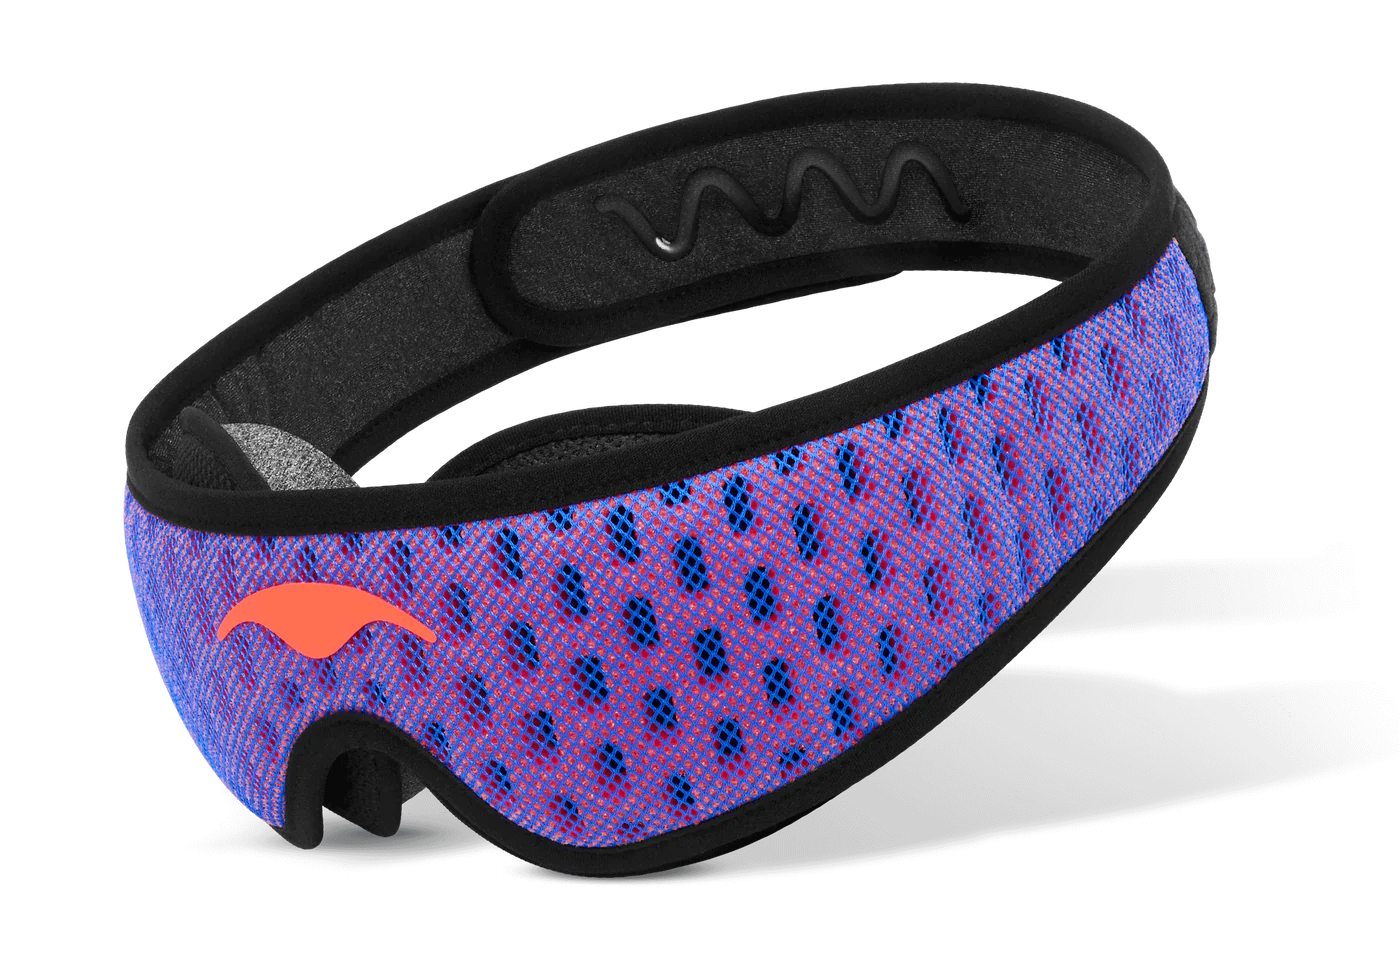 A blue mesh sleep mask with eye cups. There are perforations on the strap.